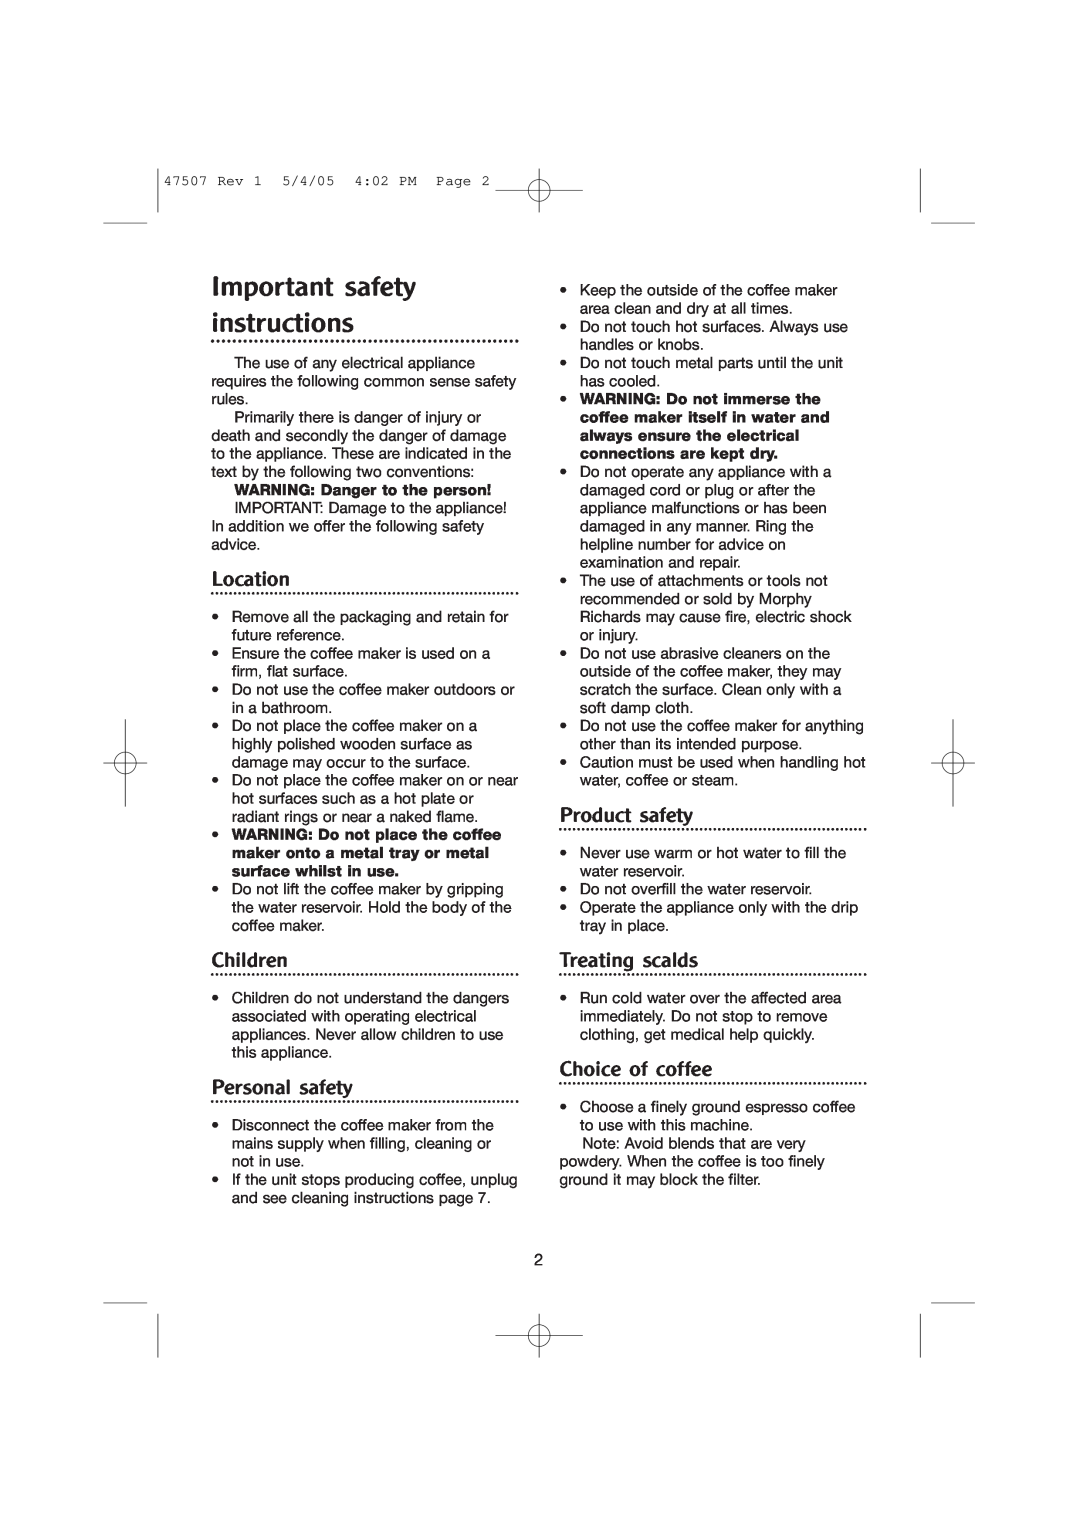 Morphy Richards CoffeMaker manual Important safety instructions, Location, Children, Personal safety, Product safety 